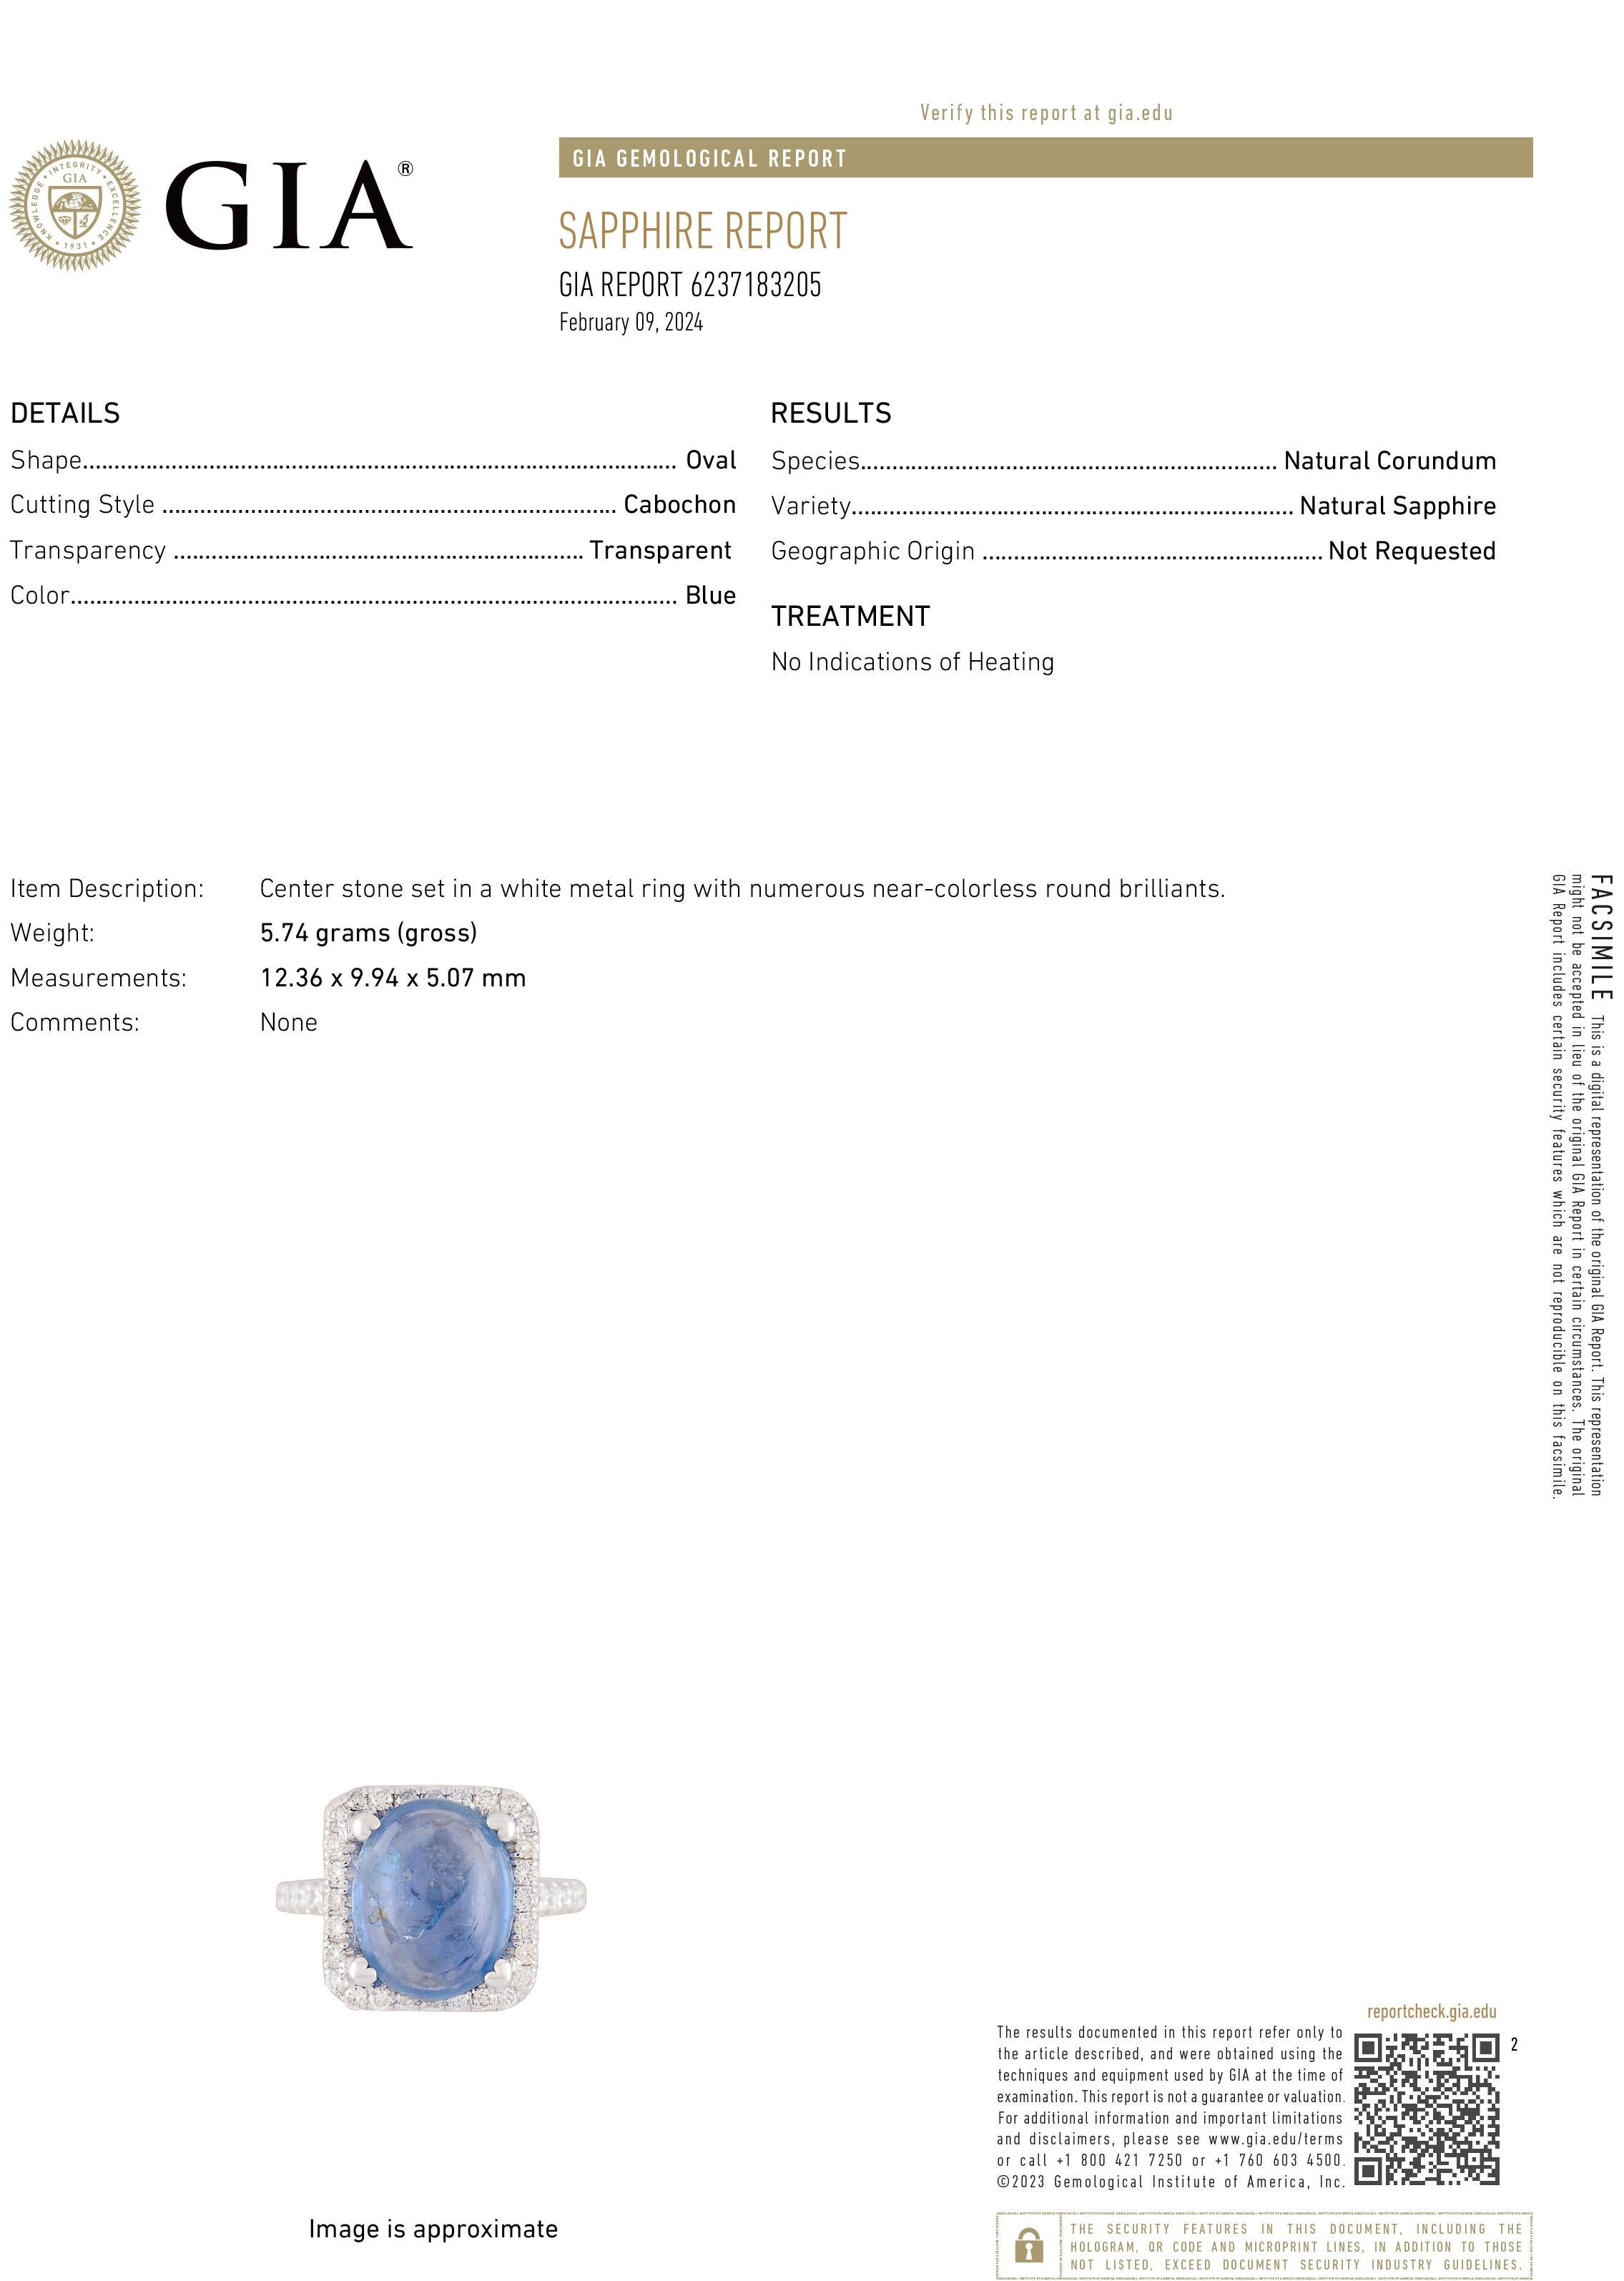 GIA Certified No Heat Sapphire 6.46 Carat Diamond 0.75 Carat 14 Karat White Gold Ring 5.5
This exquisite engagement ring features a stunning oval-shaped Ceylon sapphire, certified by the Gemological Institute of America (GIA) as having no